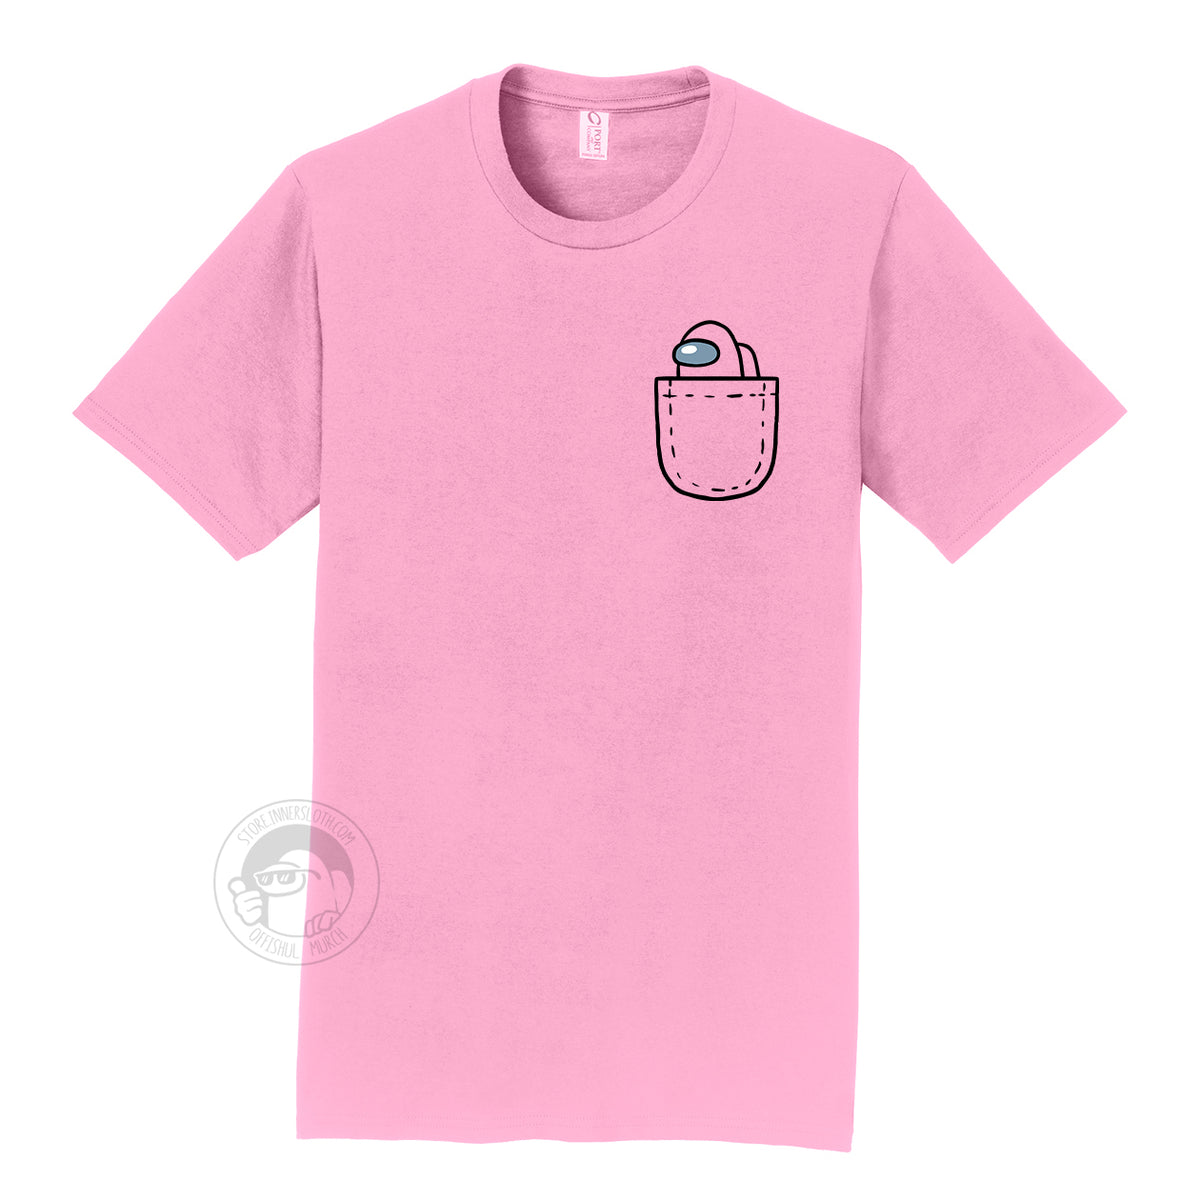 A product photograph of the Among Us: Mini Crewmate Pocket Tee in pink. The shirt art depicts a fake pocket and a small crewmate peeking out of it. The crewmate is the same color as the rest of the shirt.